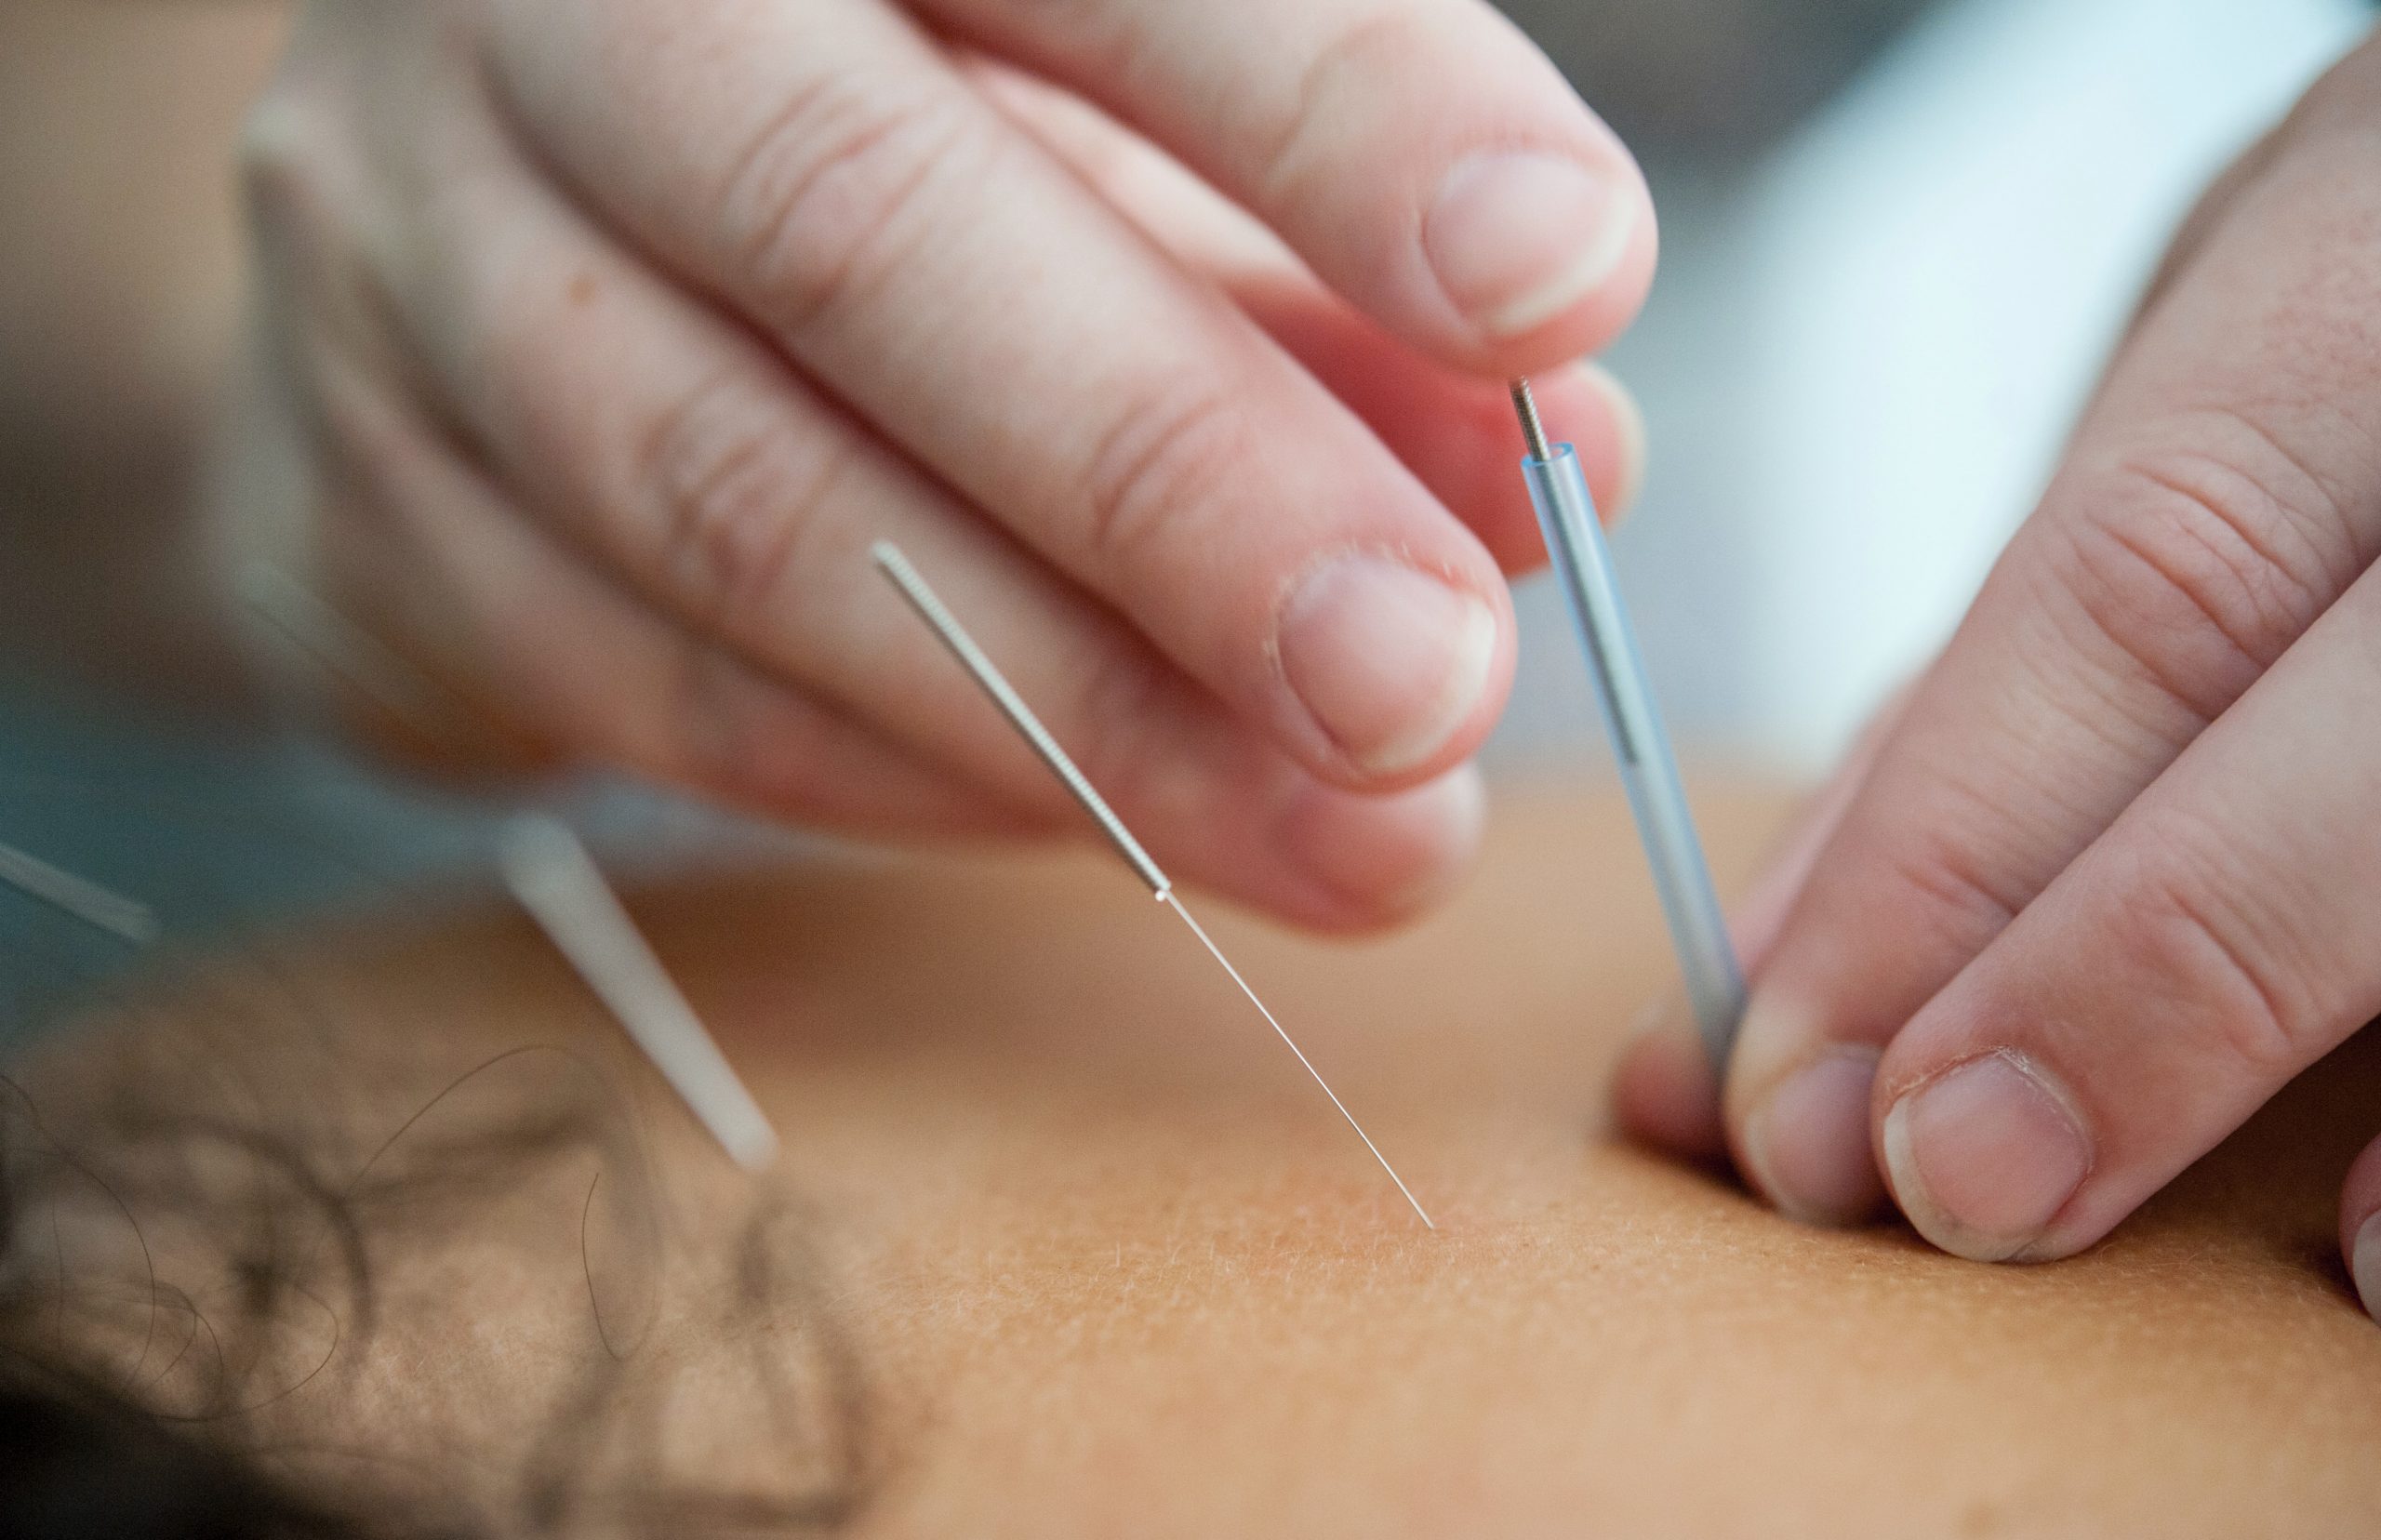 Does Acupuncture Hurt?